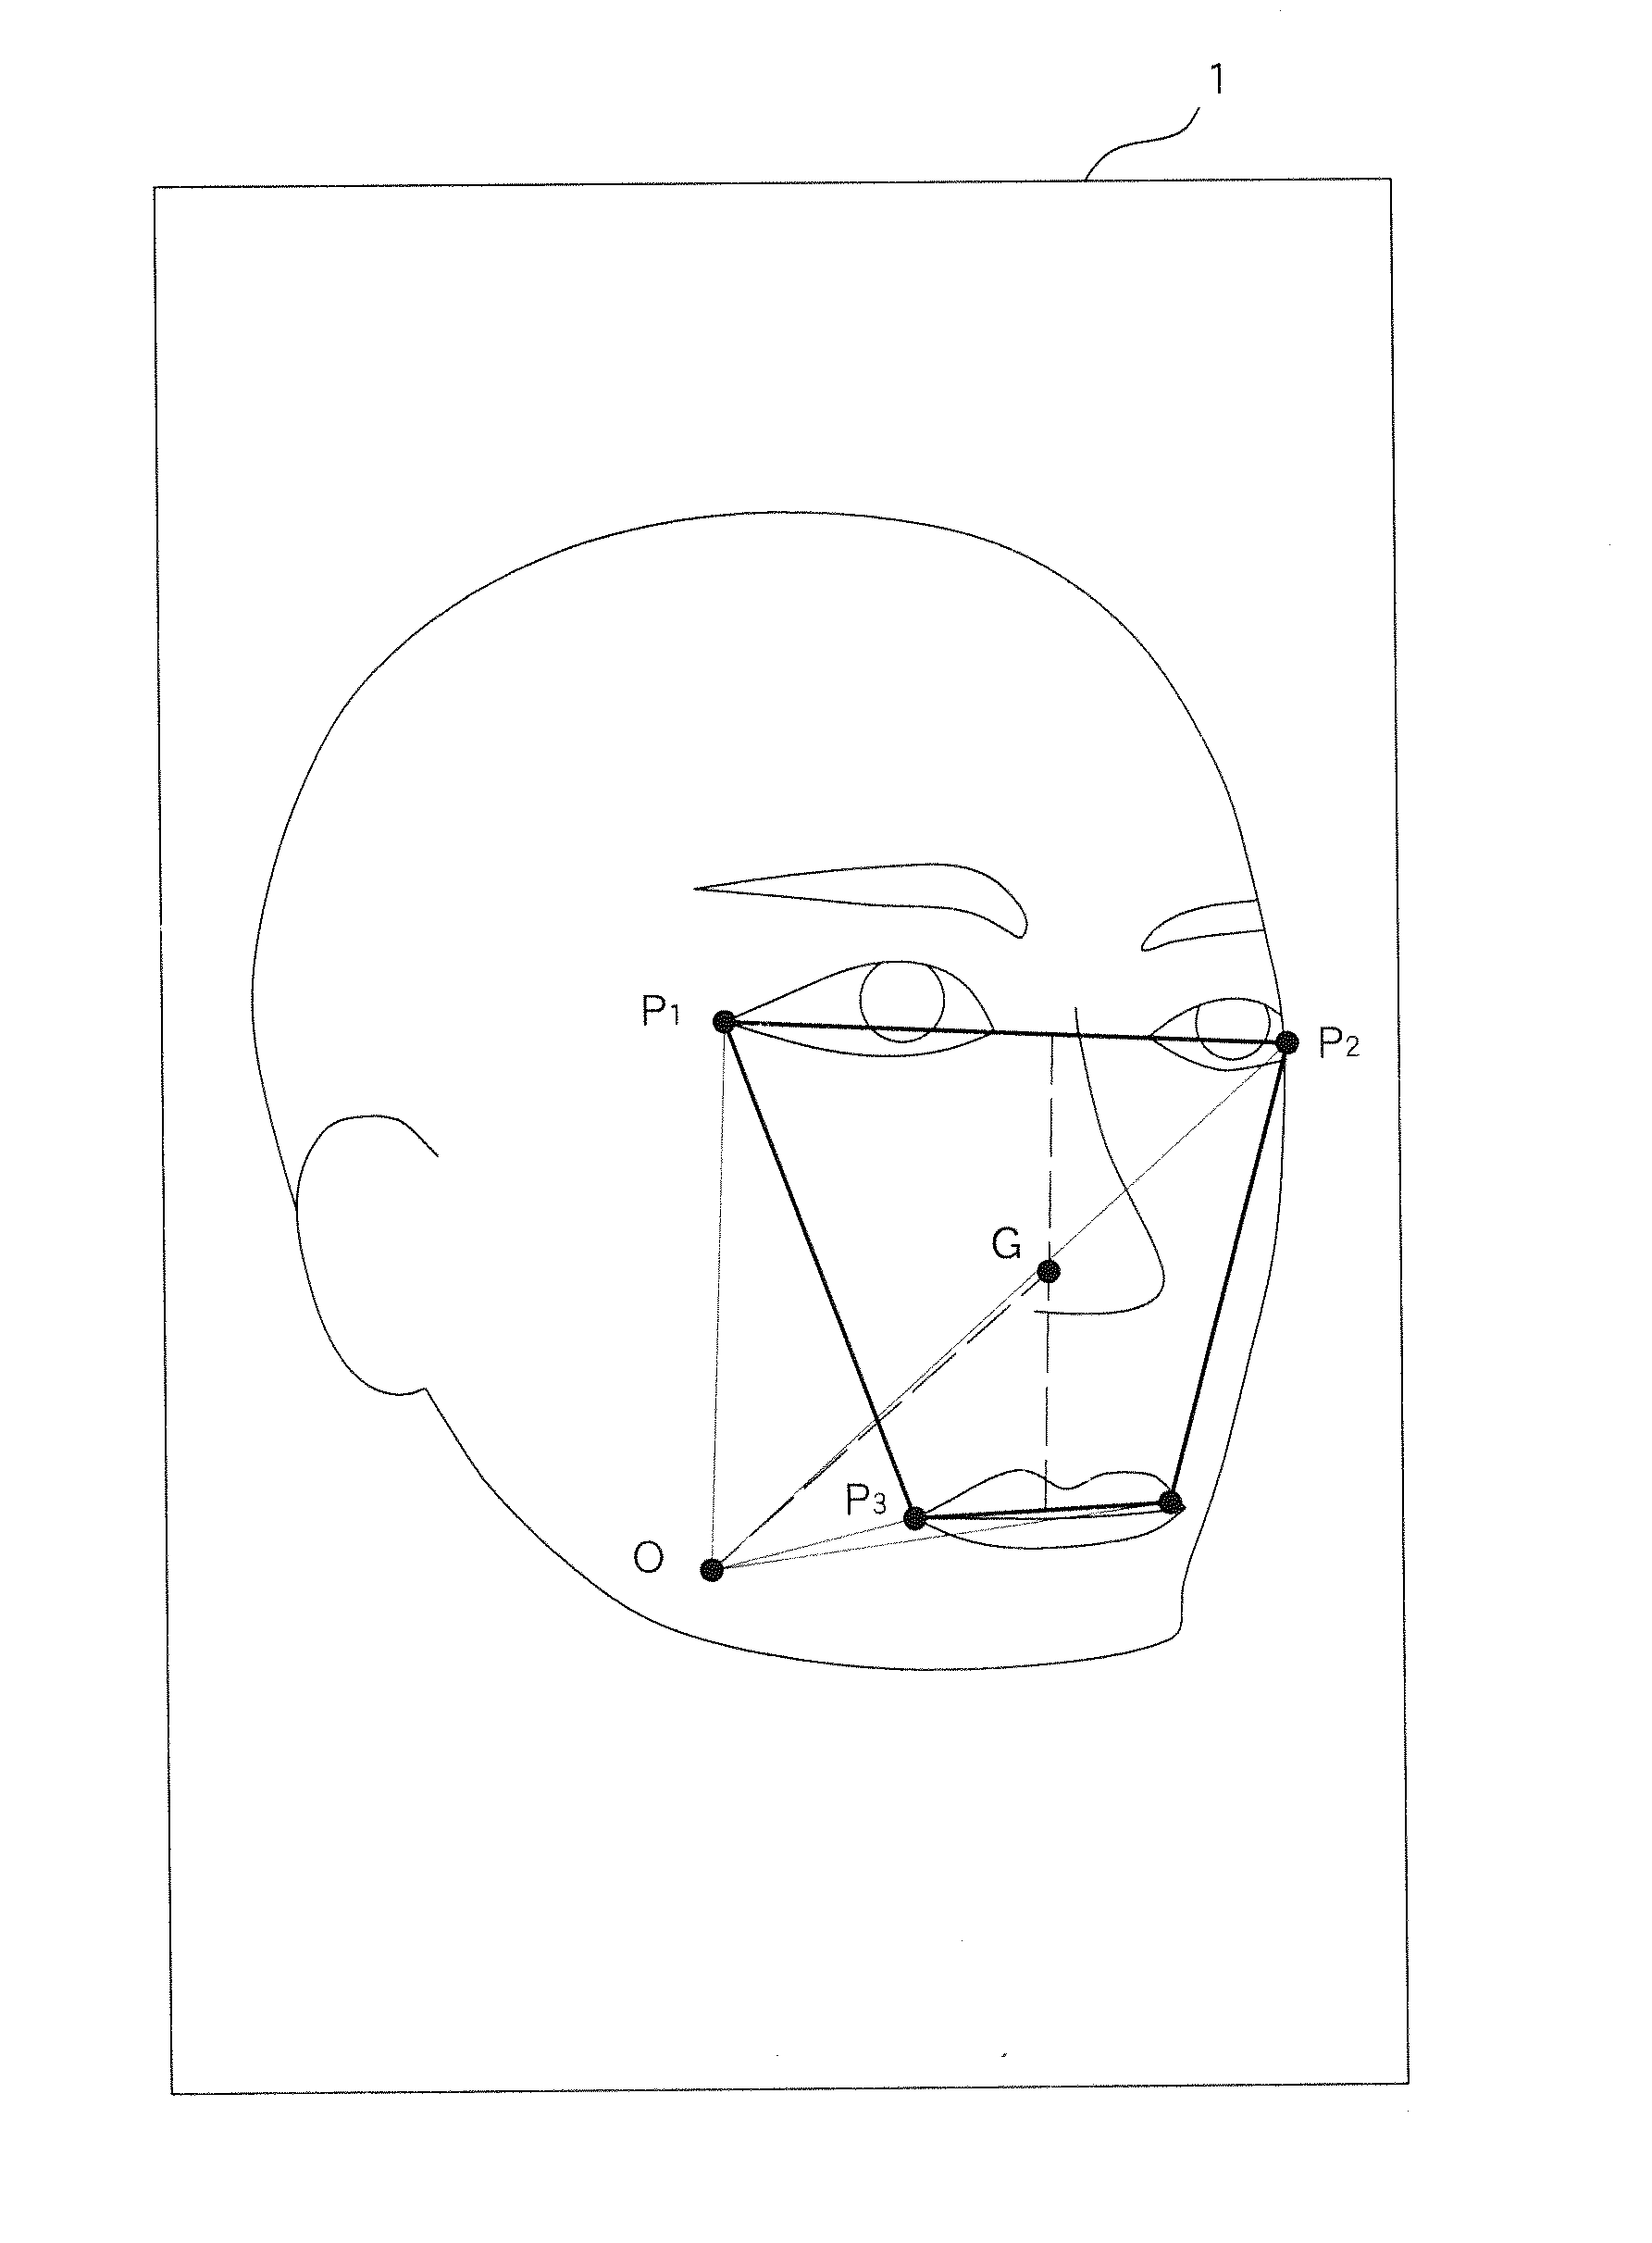 Method for estimating a 3D vector angle from a 2d face image, method for creating face replacement database, and method for replacing face image